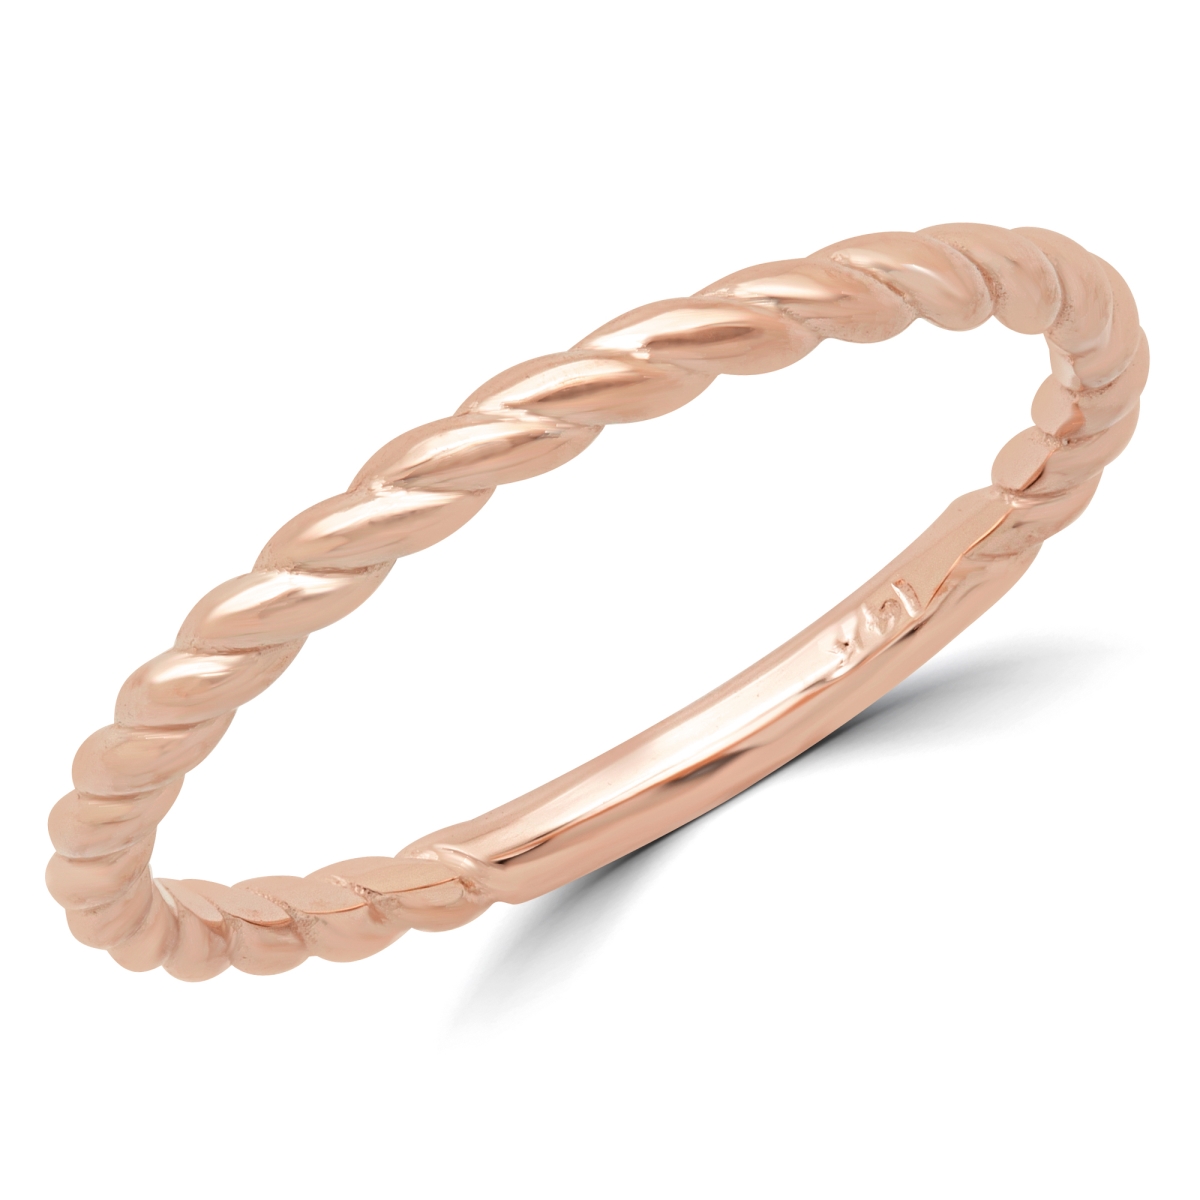 Picture of Majesty Diamonds MD180603-8.25 Braided Rope Classic Wedding Band Ring in 14K Rose Gold - Size 8.25